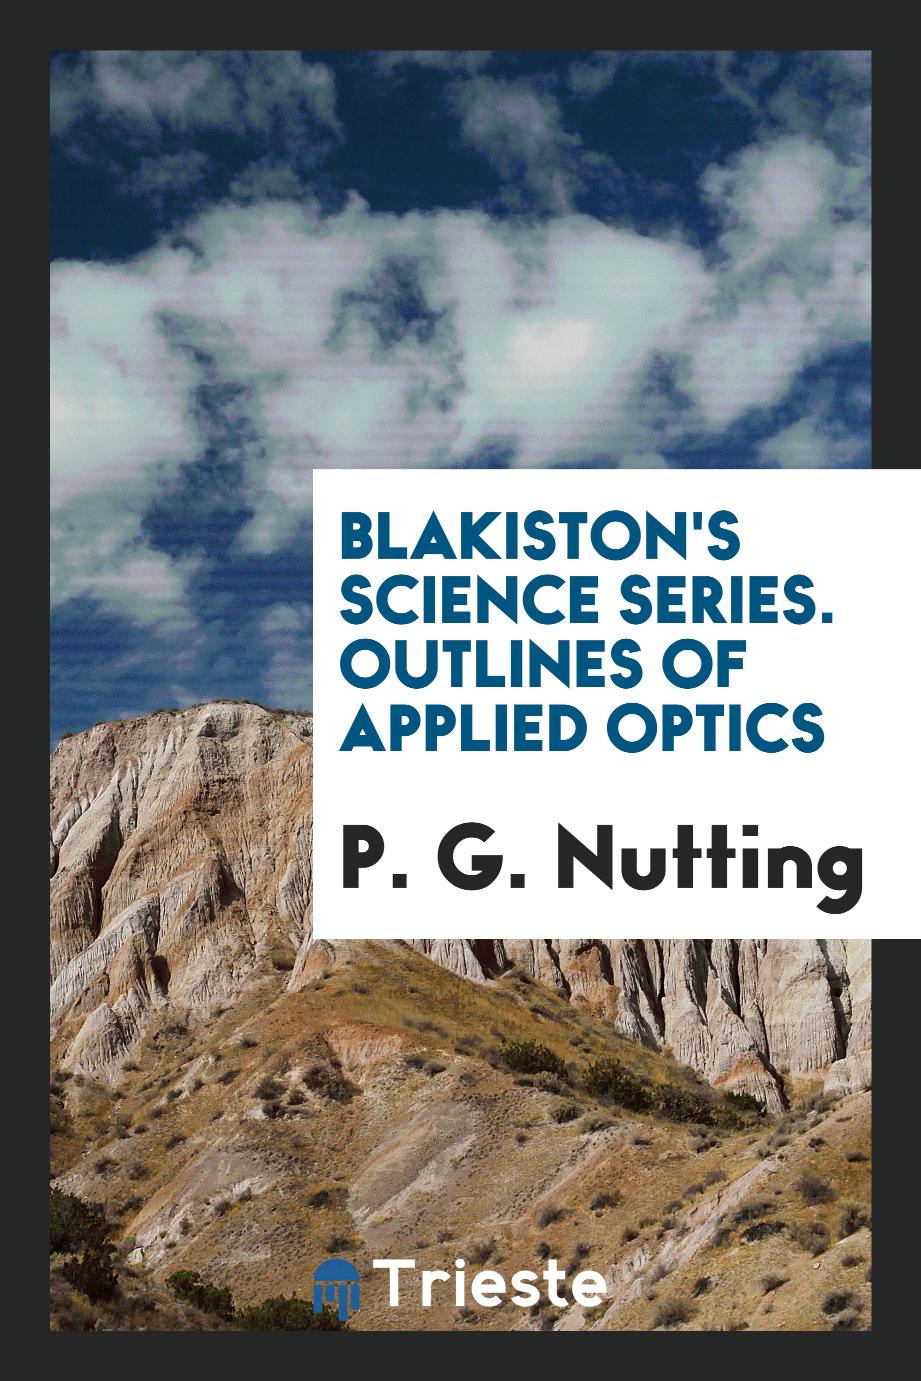 Blakiston's science series. Outlines of applied optics